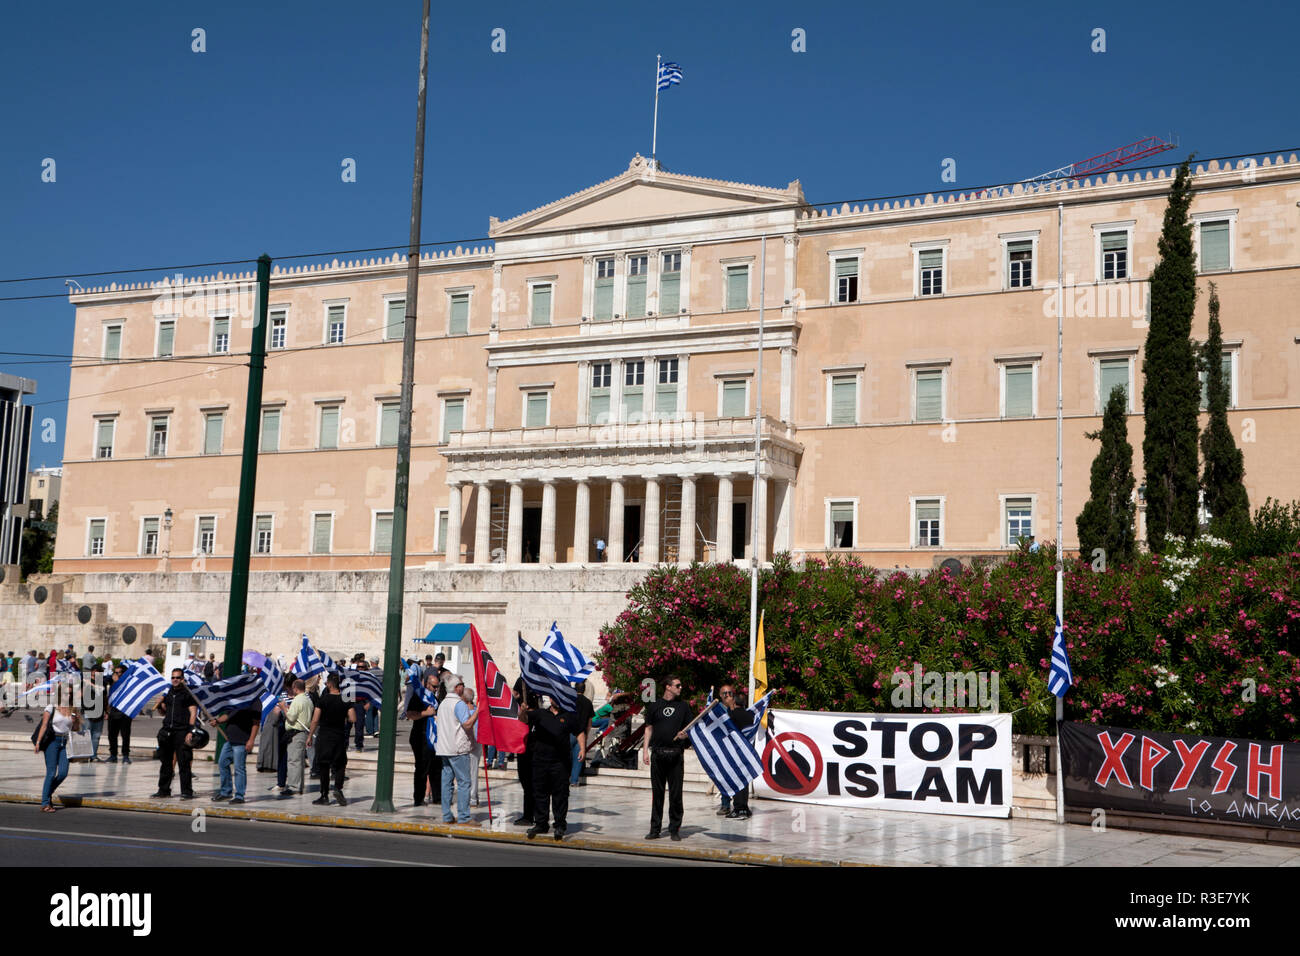 anti islam demonstration vouli parliament building syntagma square athens greece Stock Photo